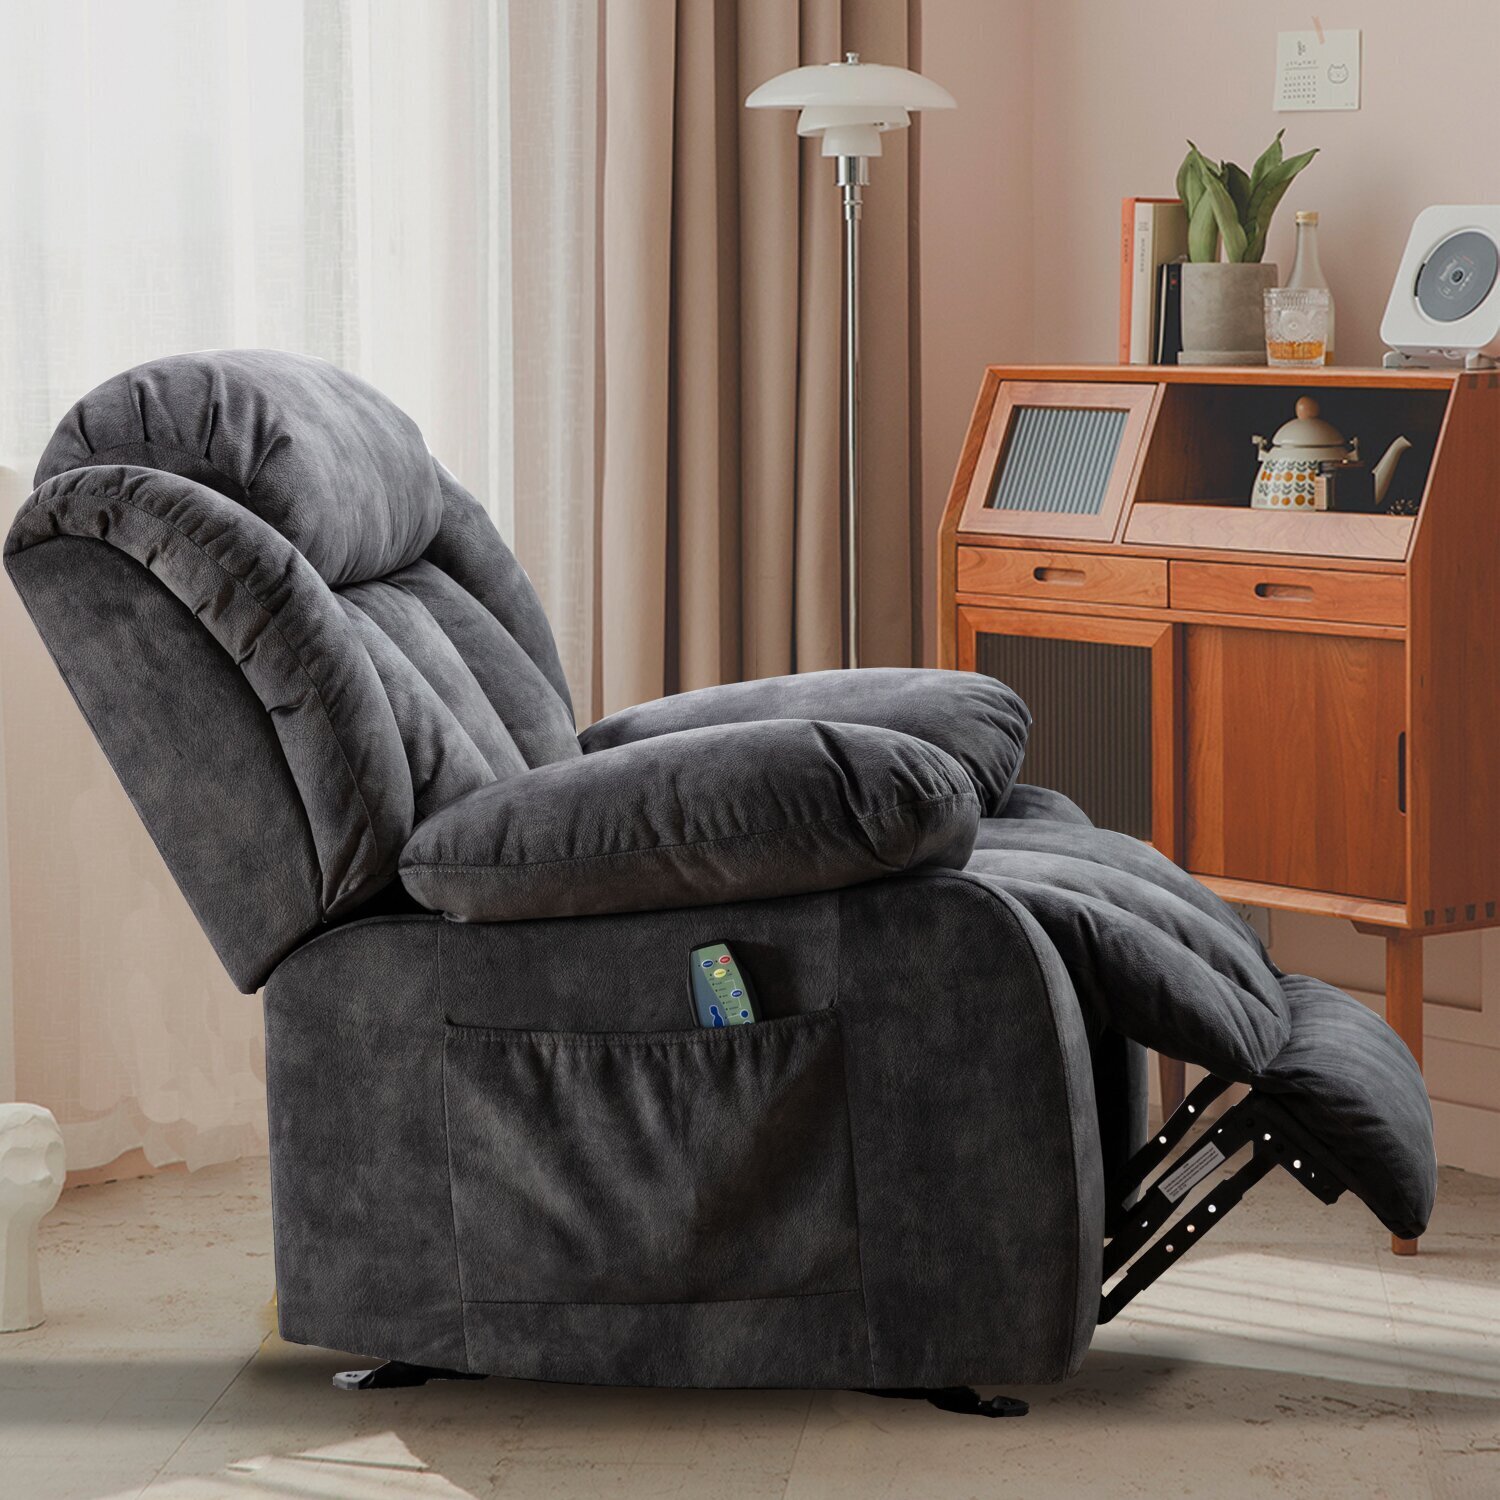 Luxurious Heated Massage Chair/ Large Recliner